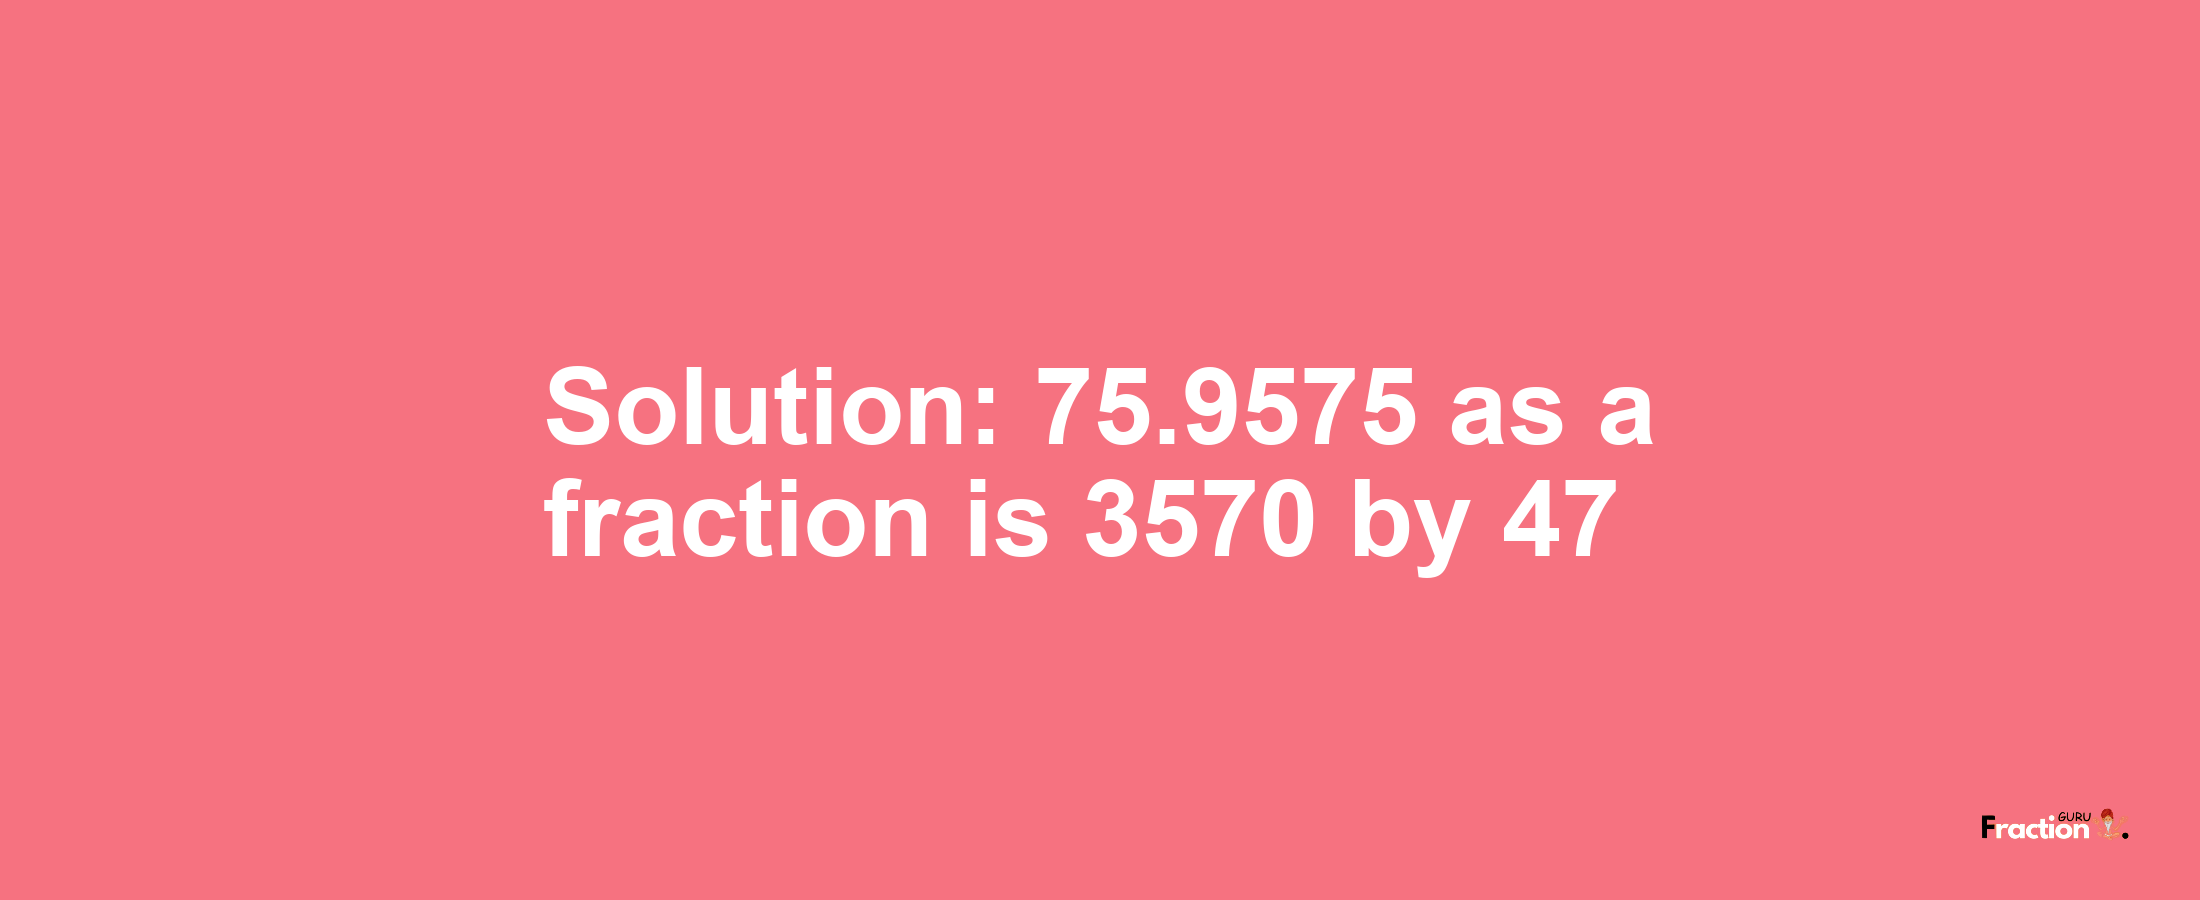 Solution:75.9575 as a fraction is 3570/47